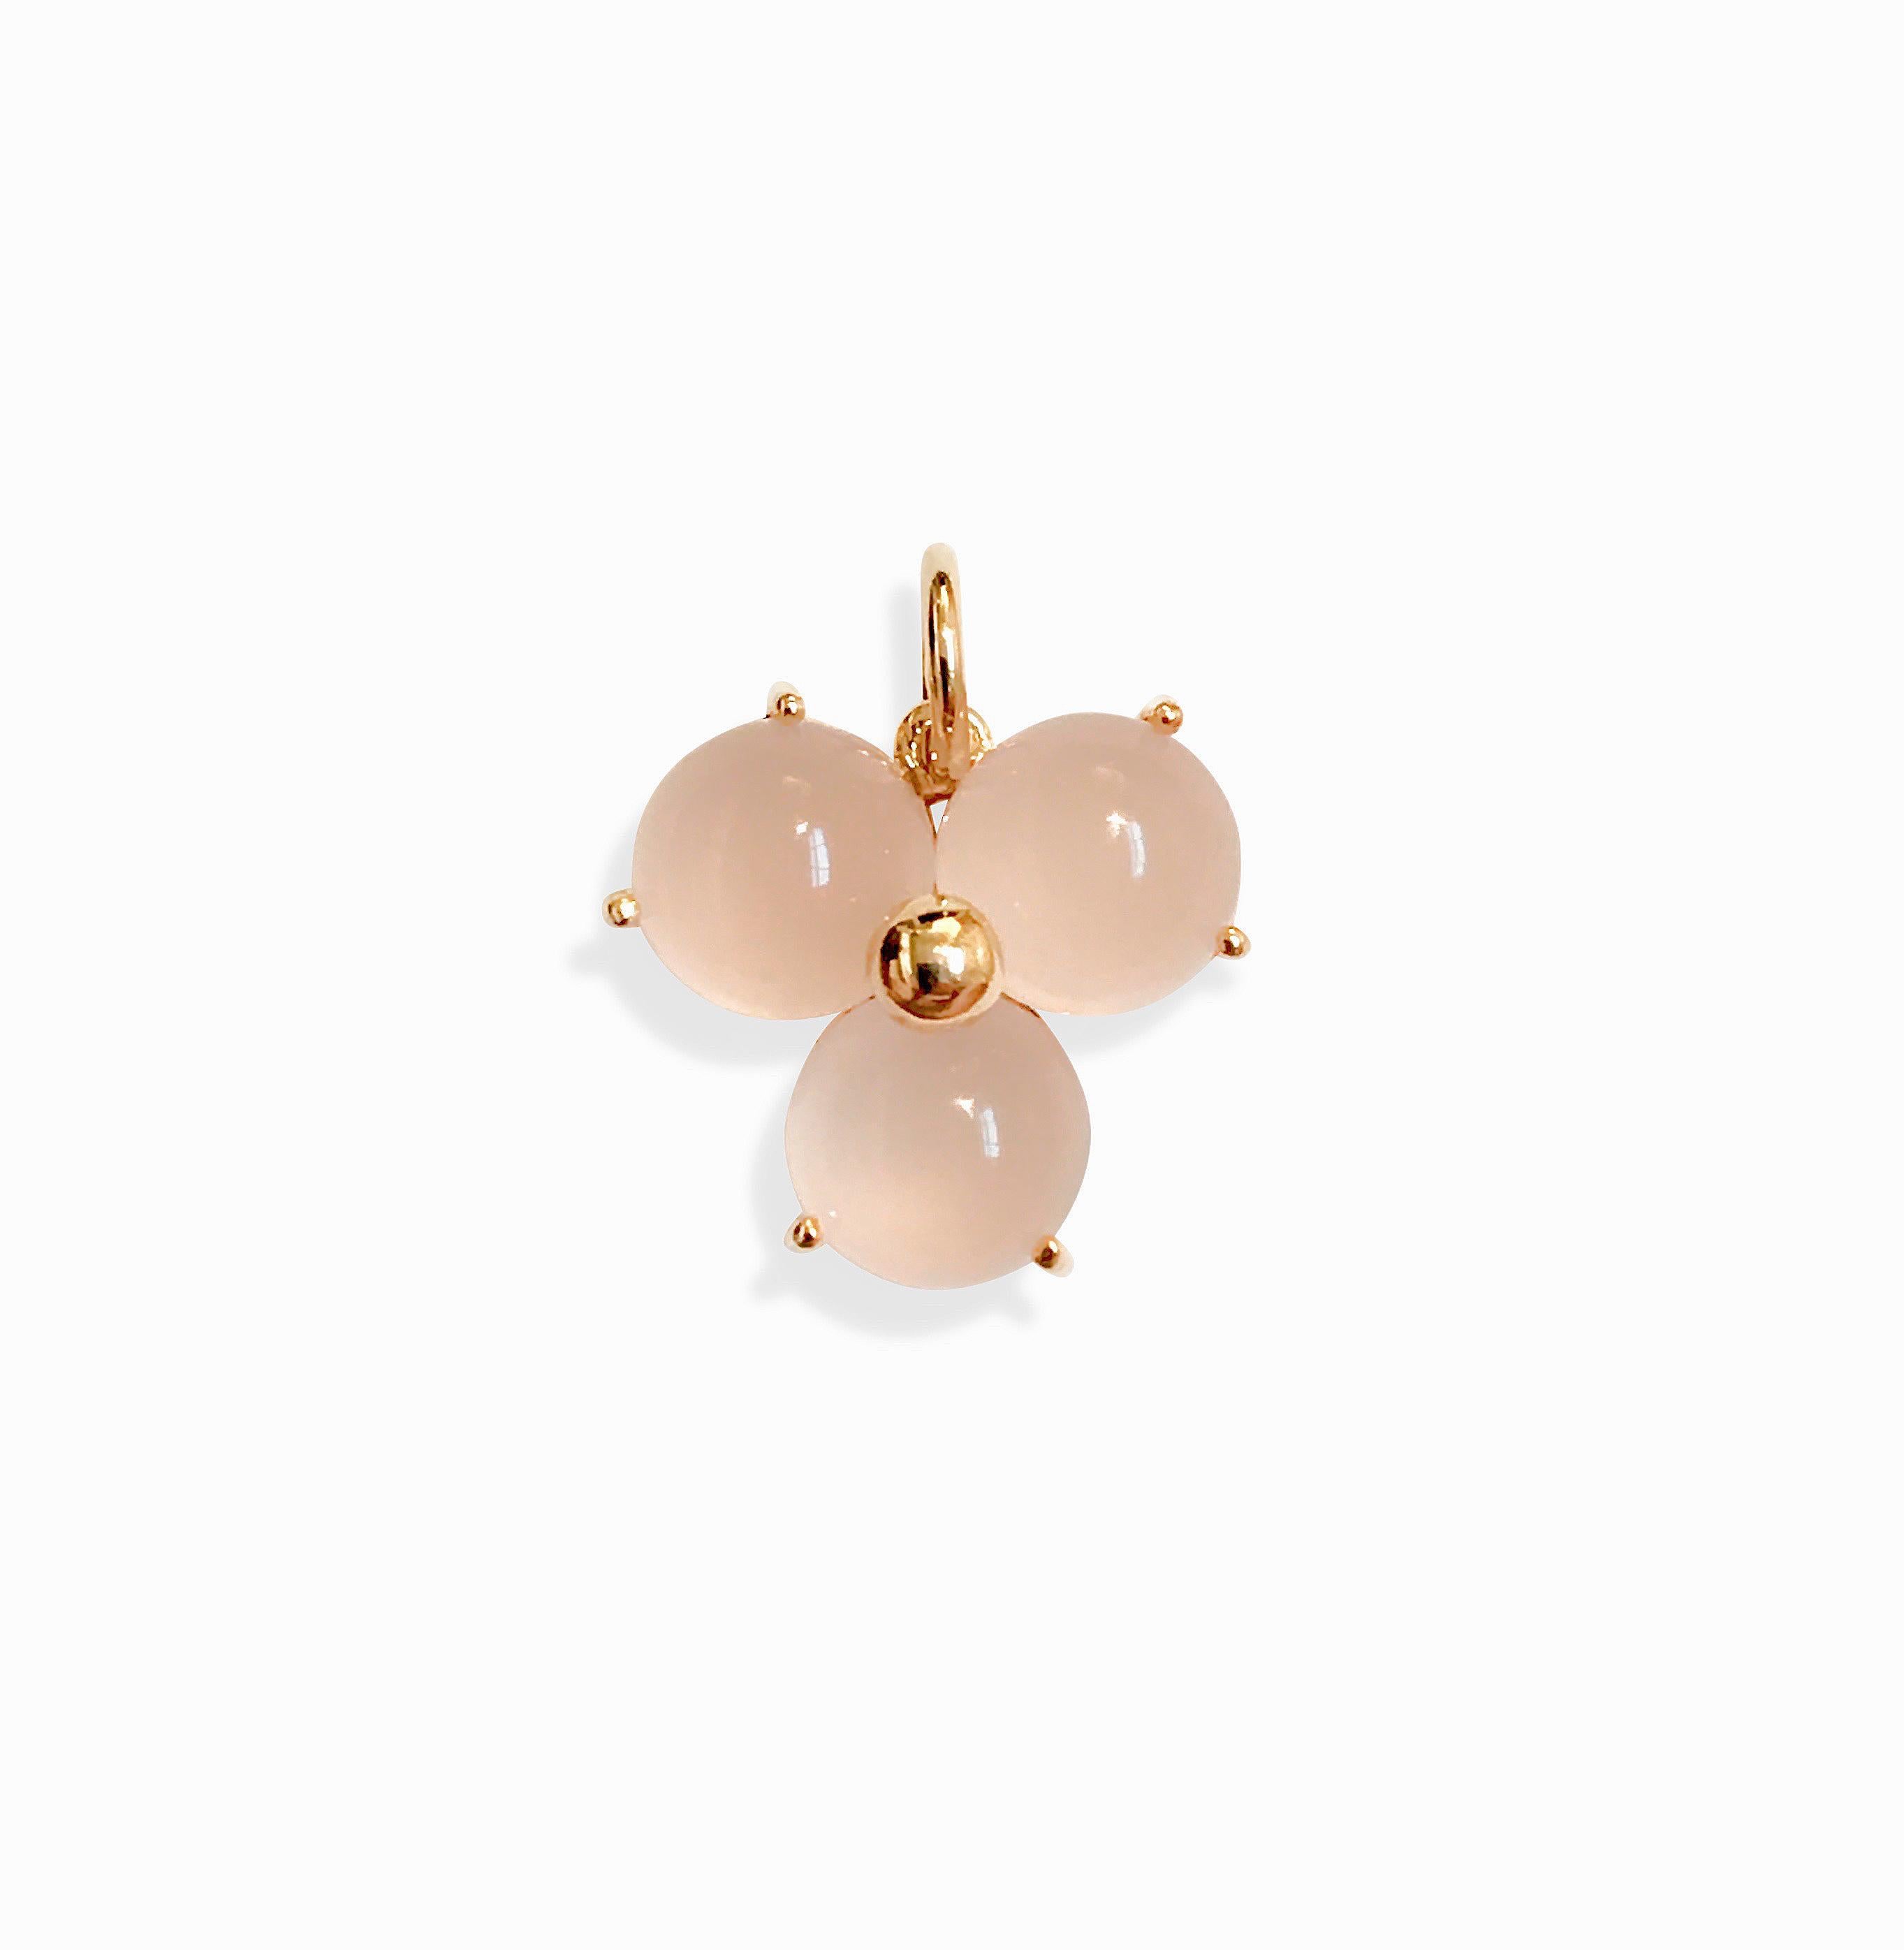 Handmade pendant made of 18 karat solid yellow gold and pink cabochon cut chalcedony stones. 
The chain can be used with other pendants or just by itself. 
Hallmark: London Goldsmiths’ Company –  Assay Office
Pendant's width:17.00mm
Pendant's depth: